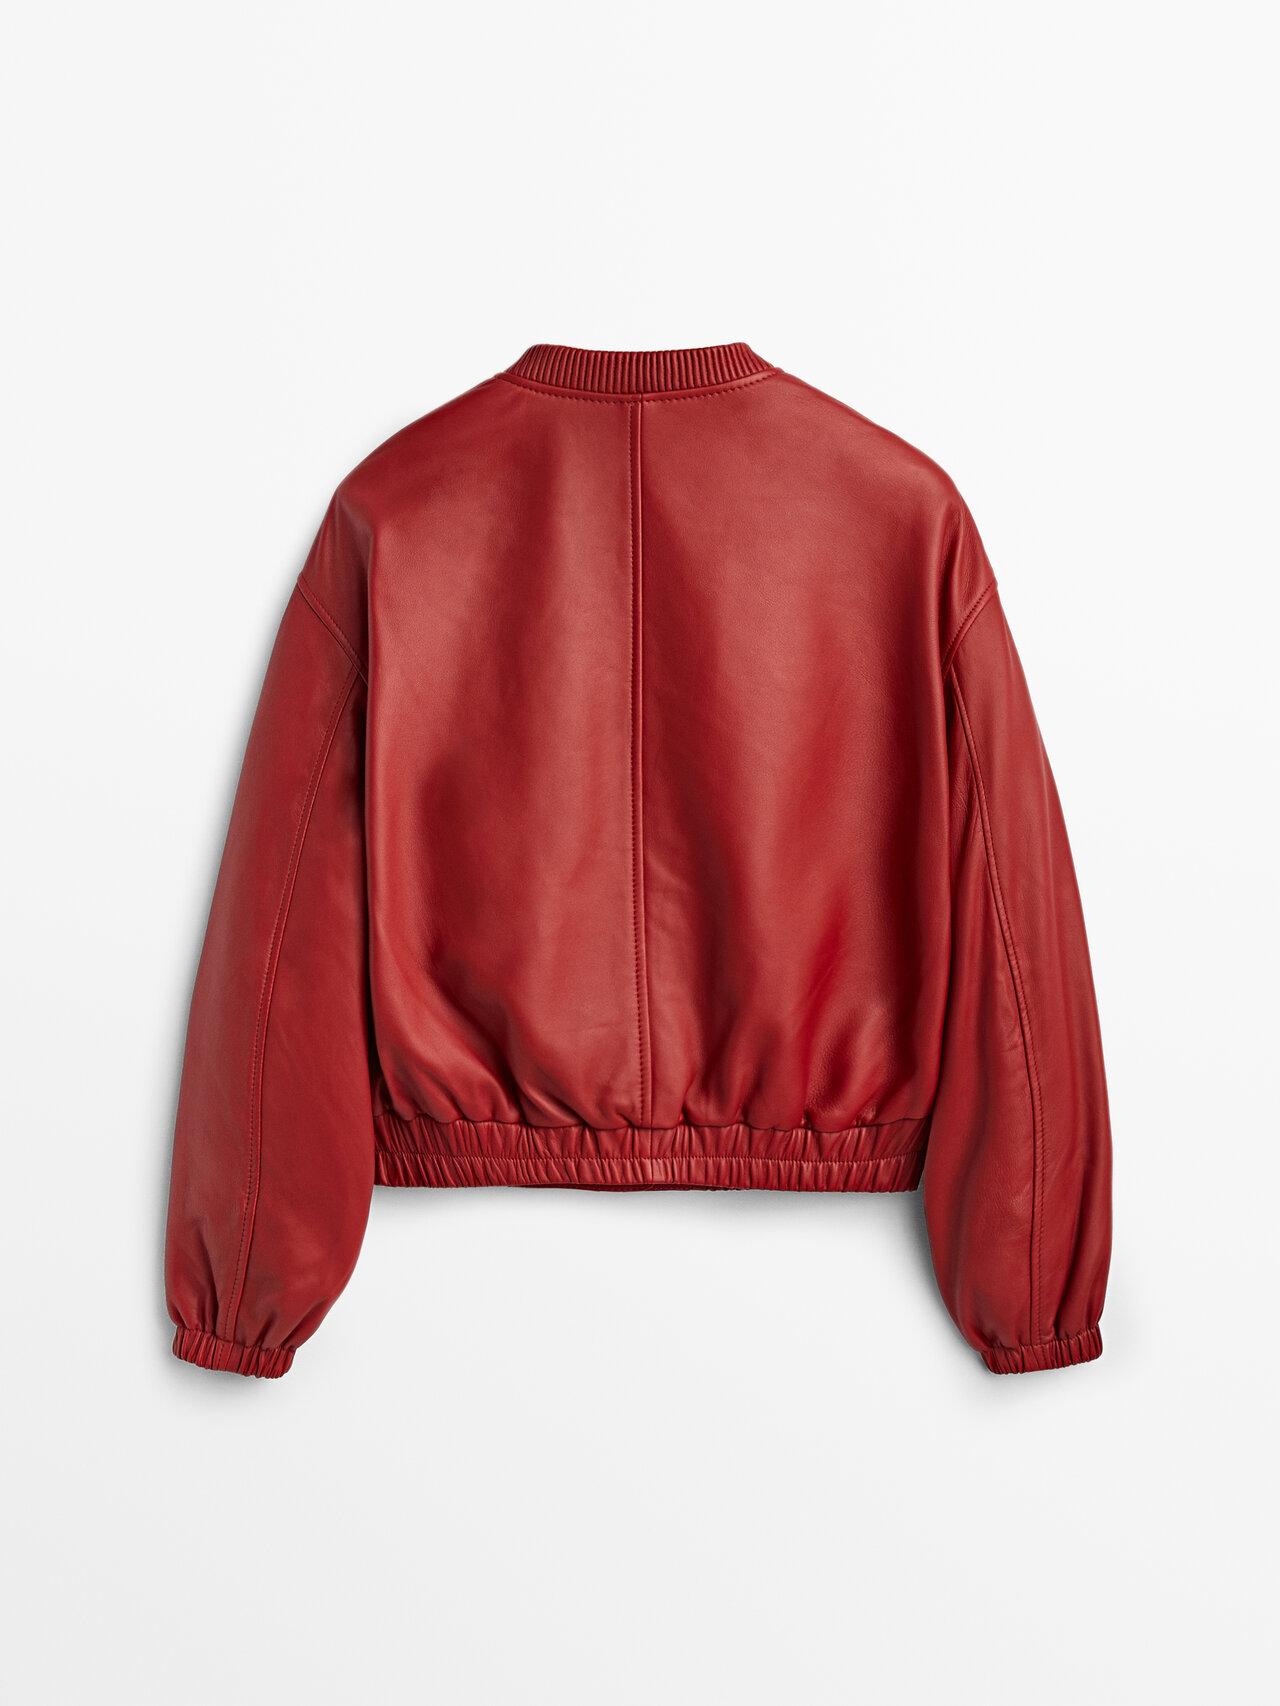 MASSIMO DUTTI Nappa Leather Bomber Jacket in Red - Lyst